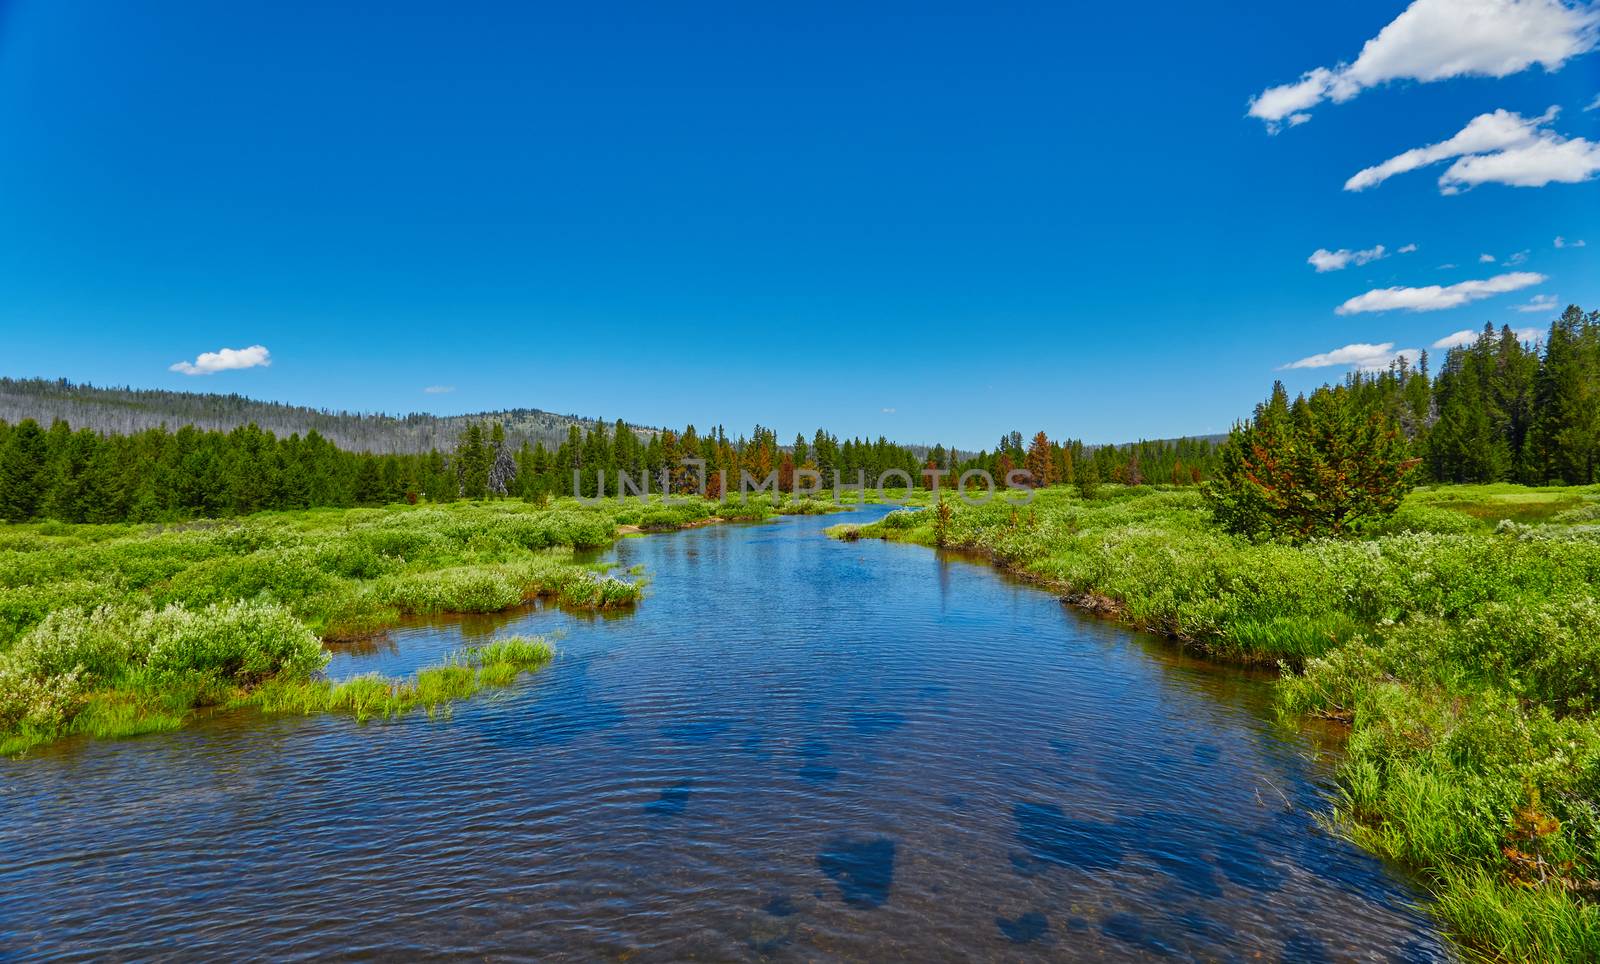 Johnson Creek flowing through a alpine meadow in the Sawtooth National Forest.